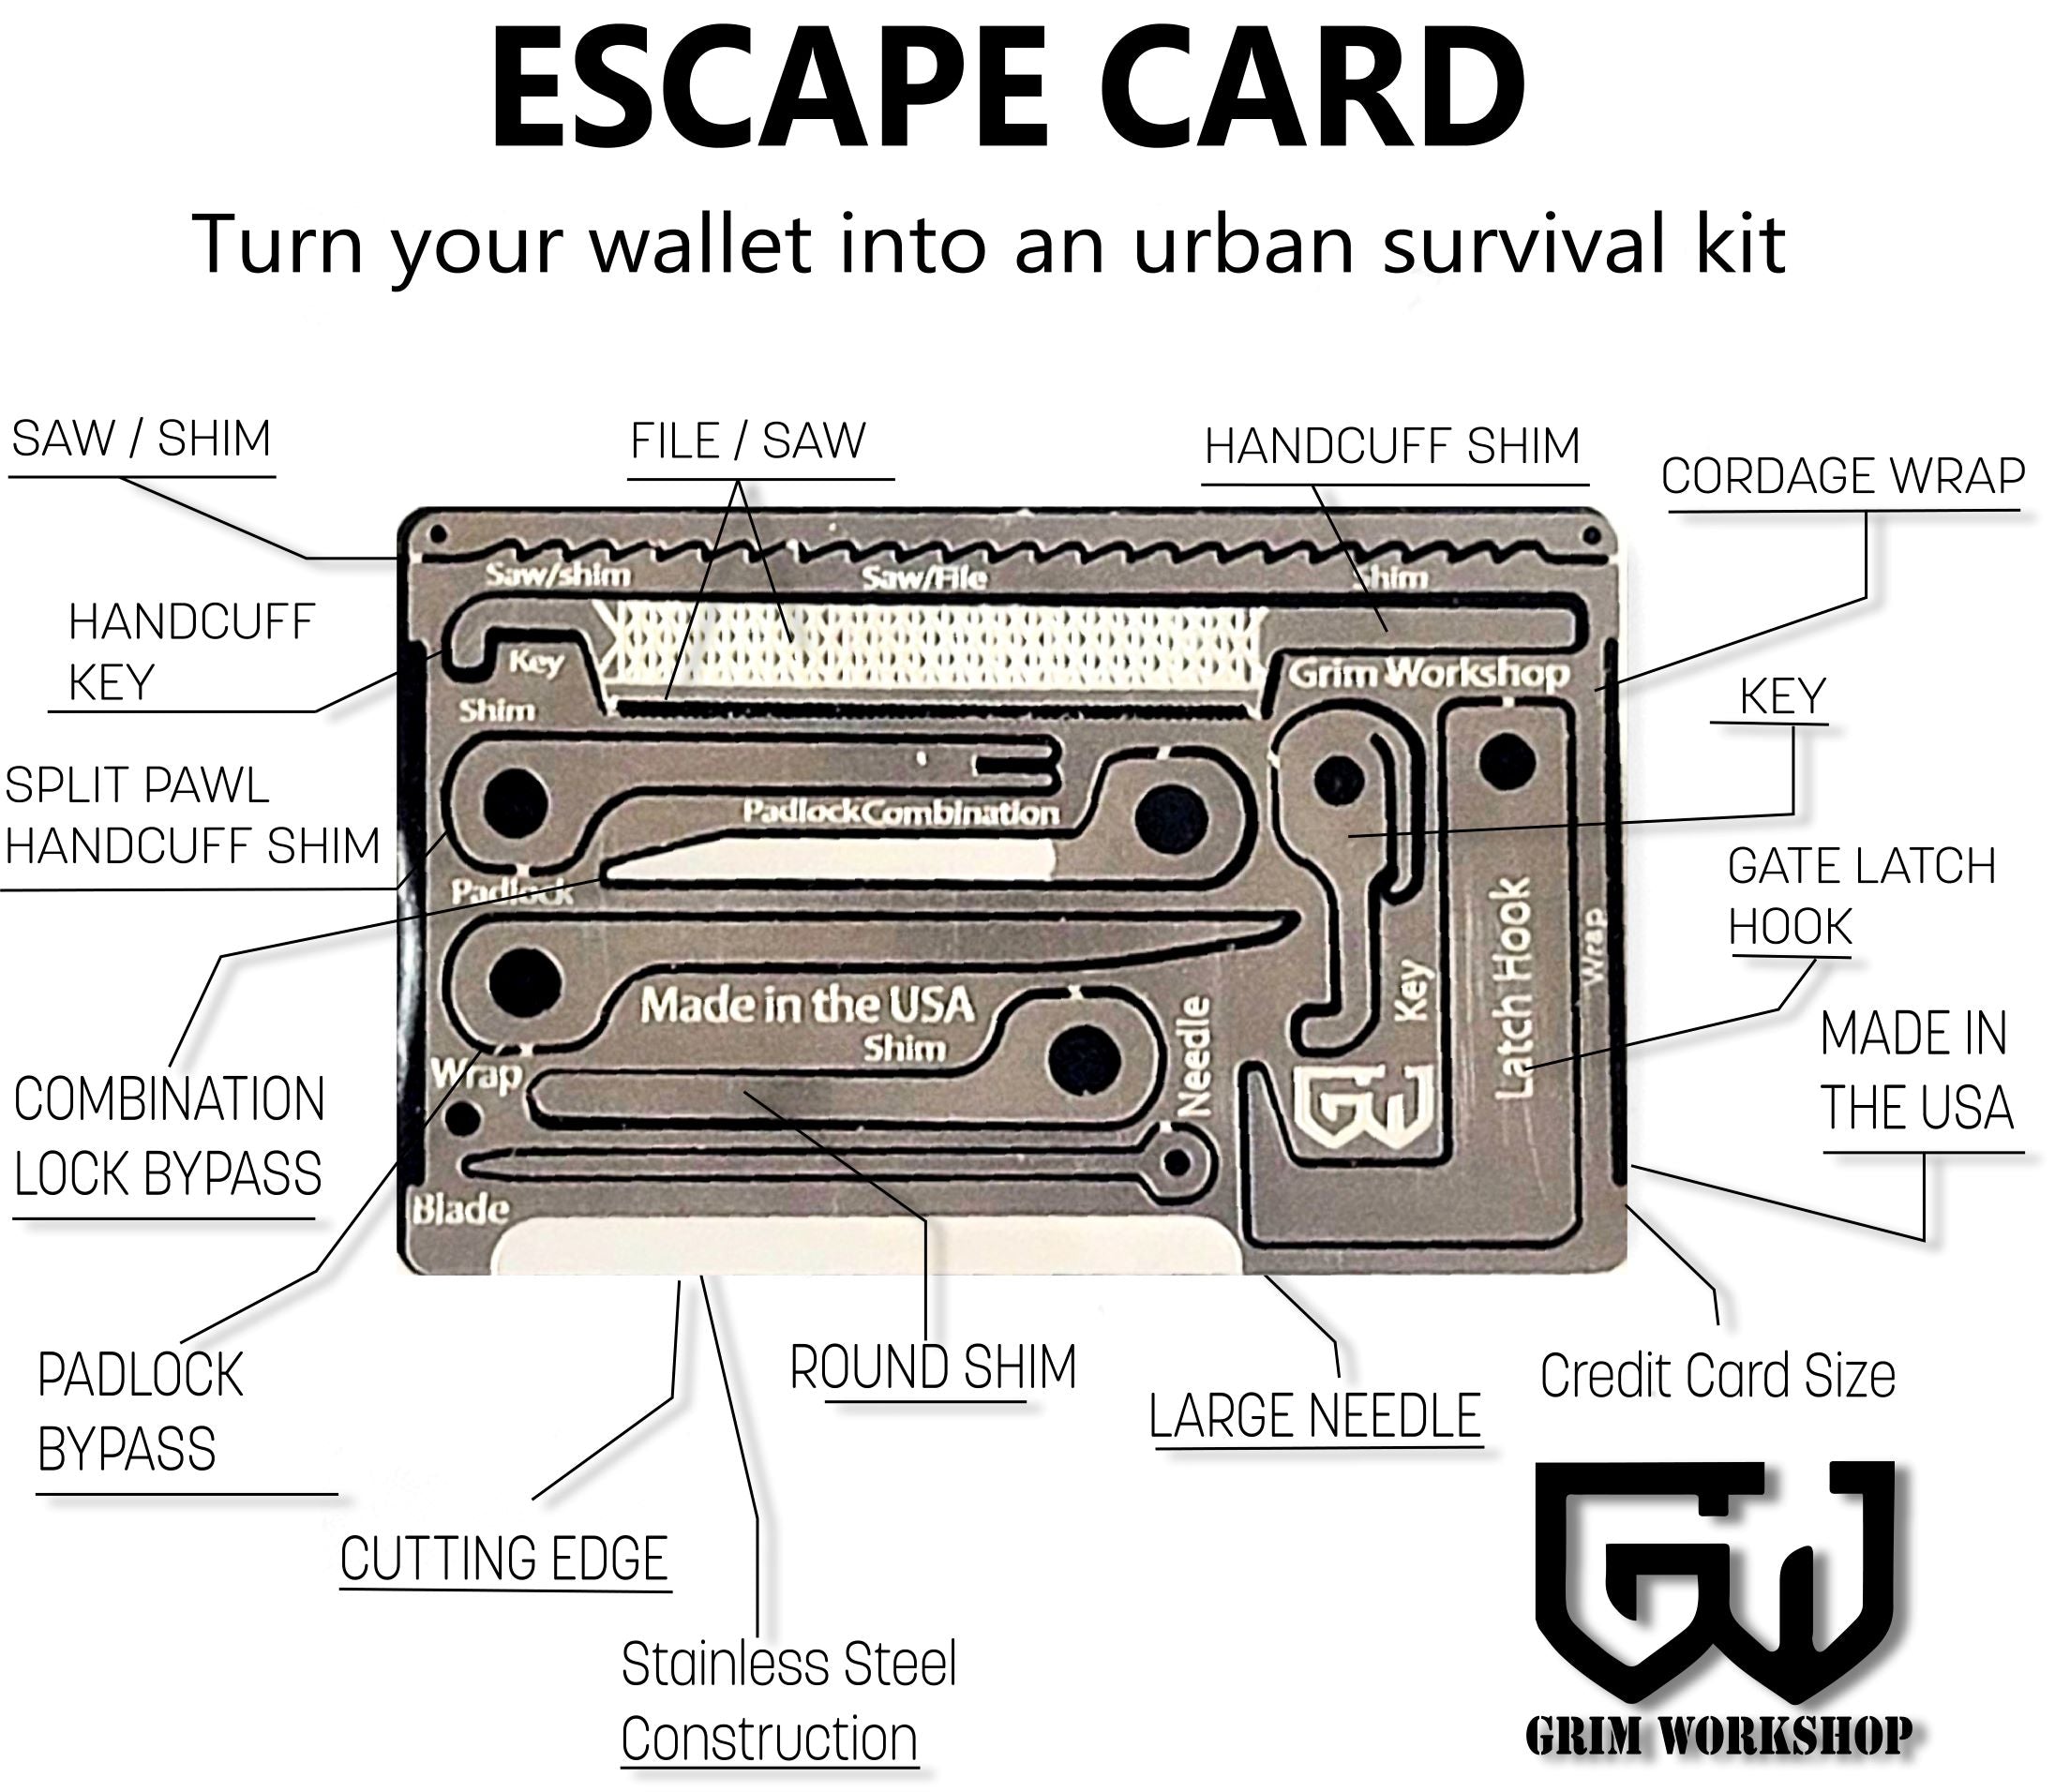 sere card credit card size urban escape and evasion kit with small bypass and escape kit